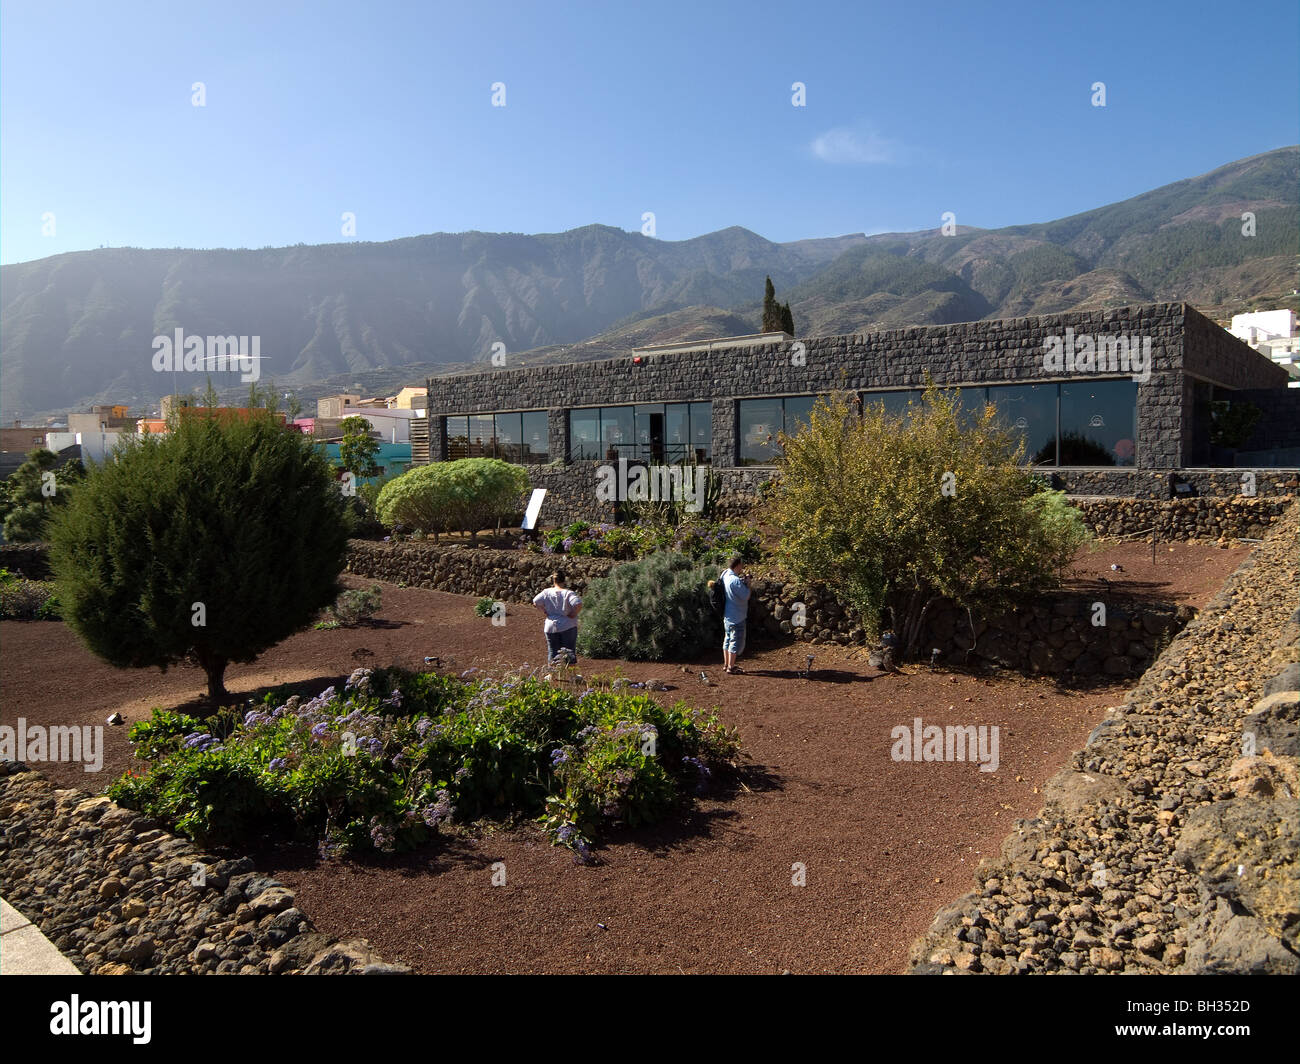 Canarian garden and administration building at the Piramides de Guimar Ethnographic Park Tenerife Canary Islands Stock Photo